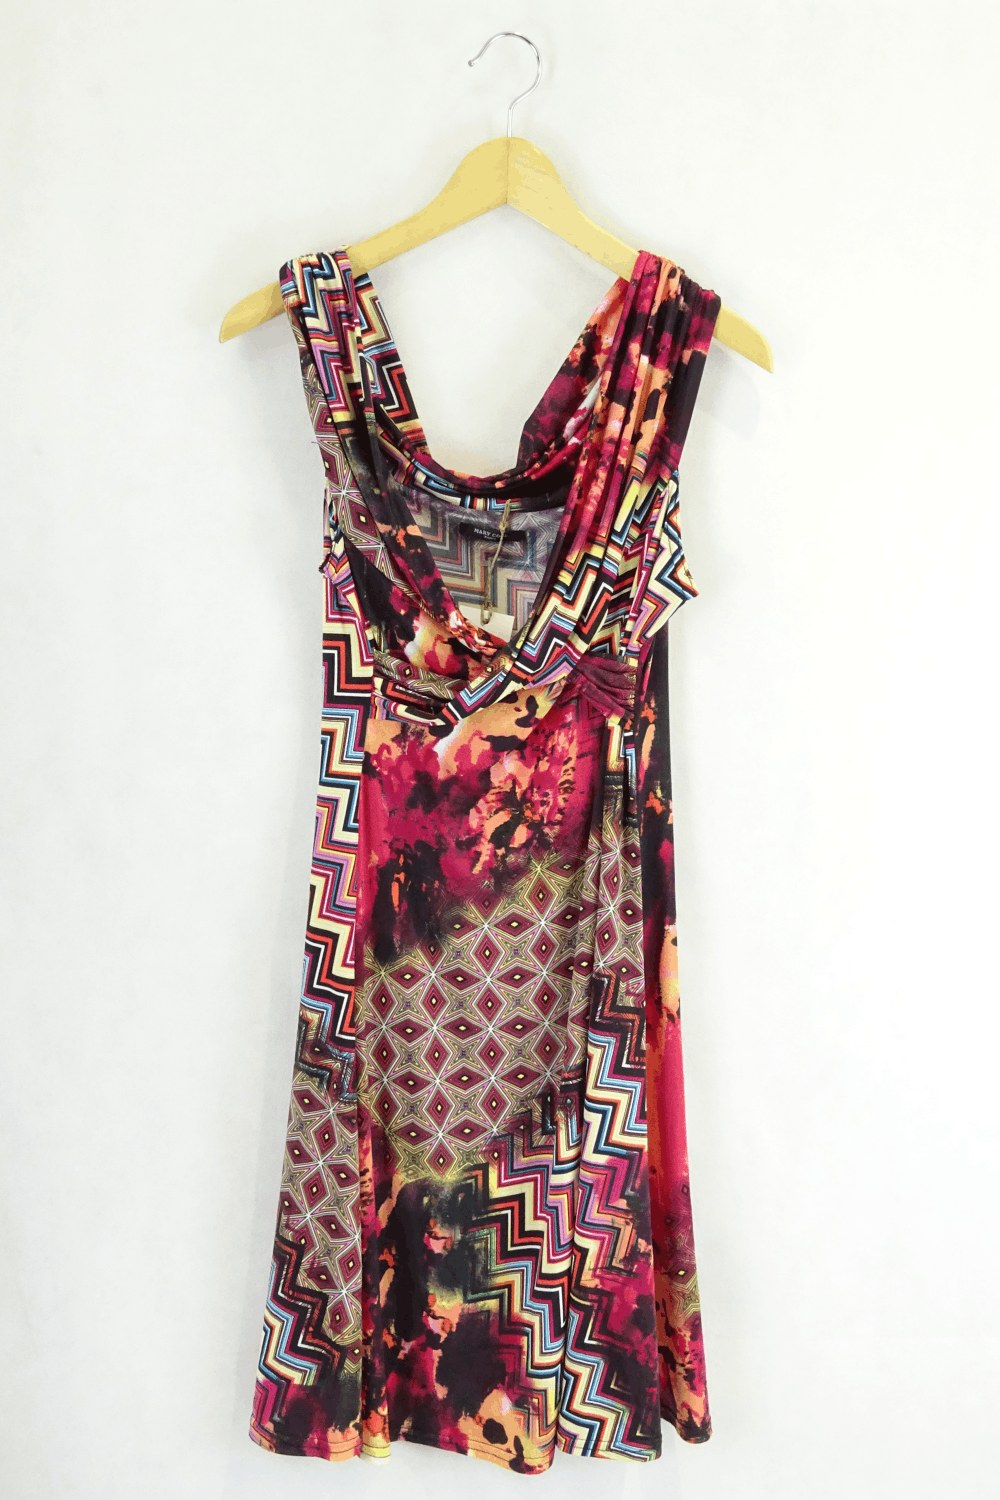 Mary Cool Pattern Dress S